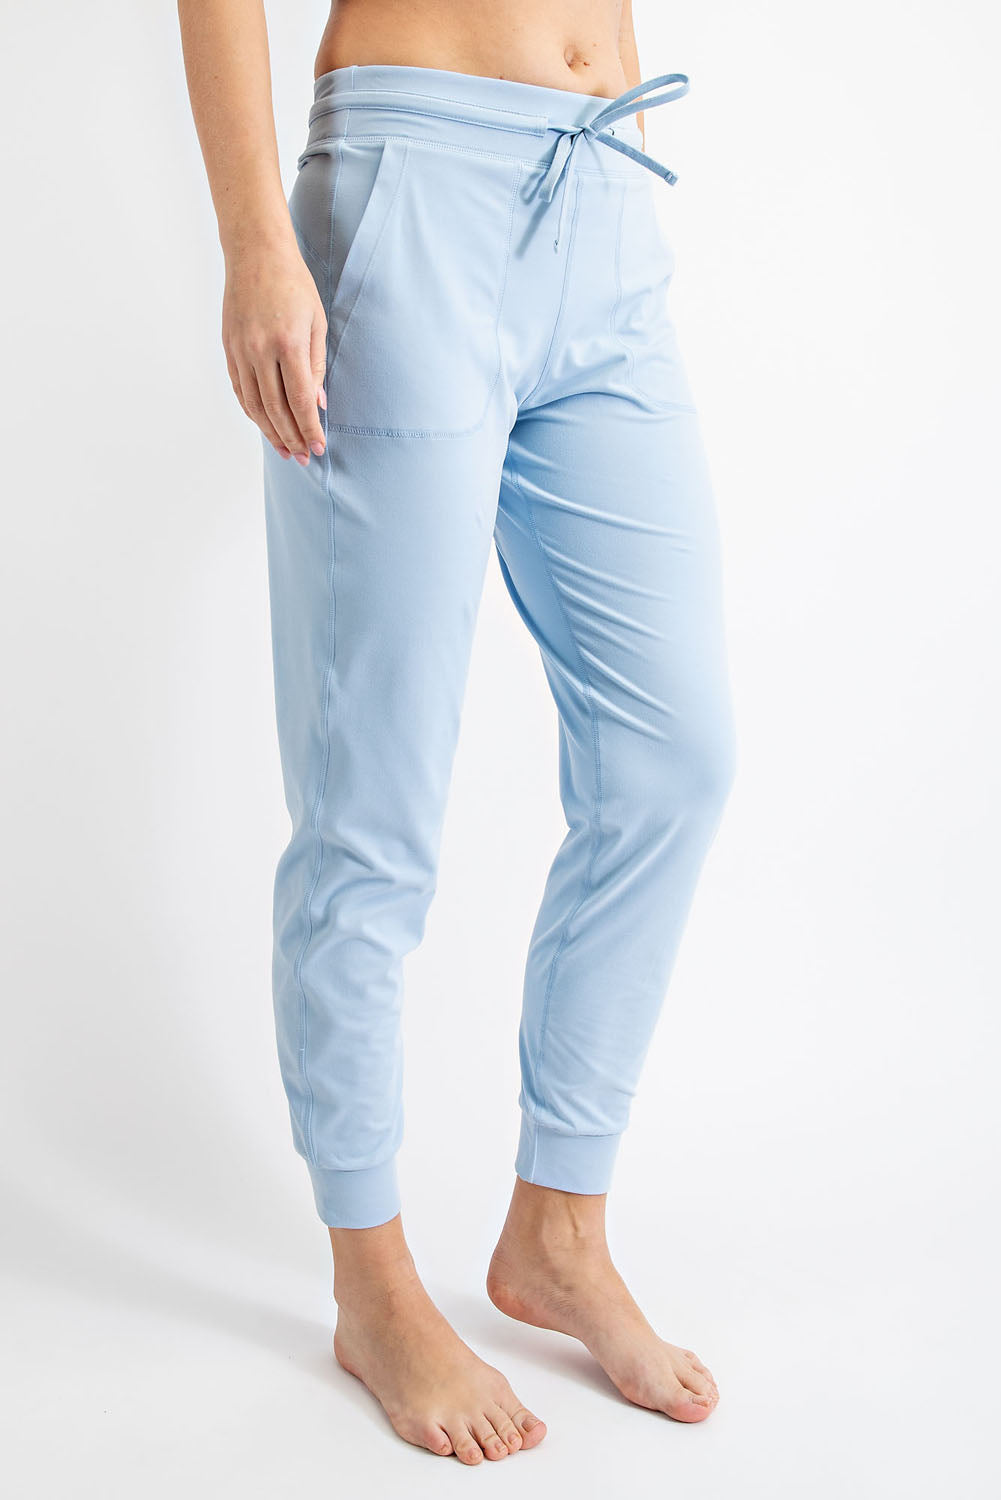 The Rae Tie Joggers